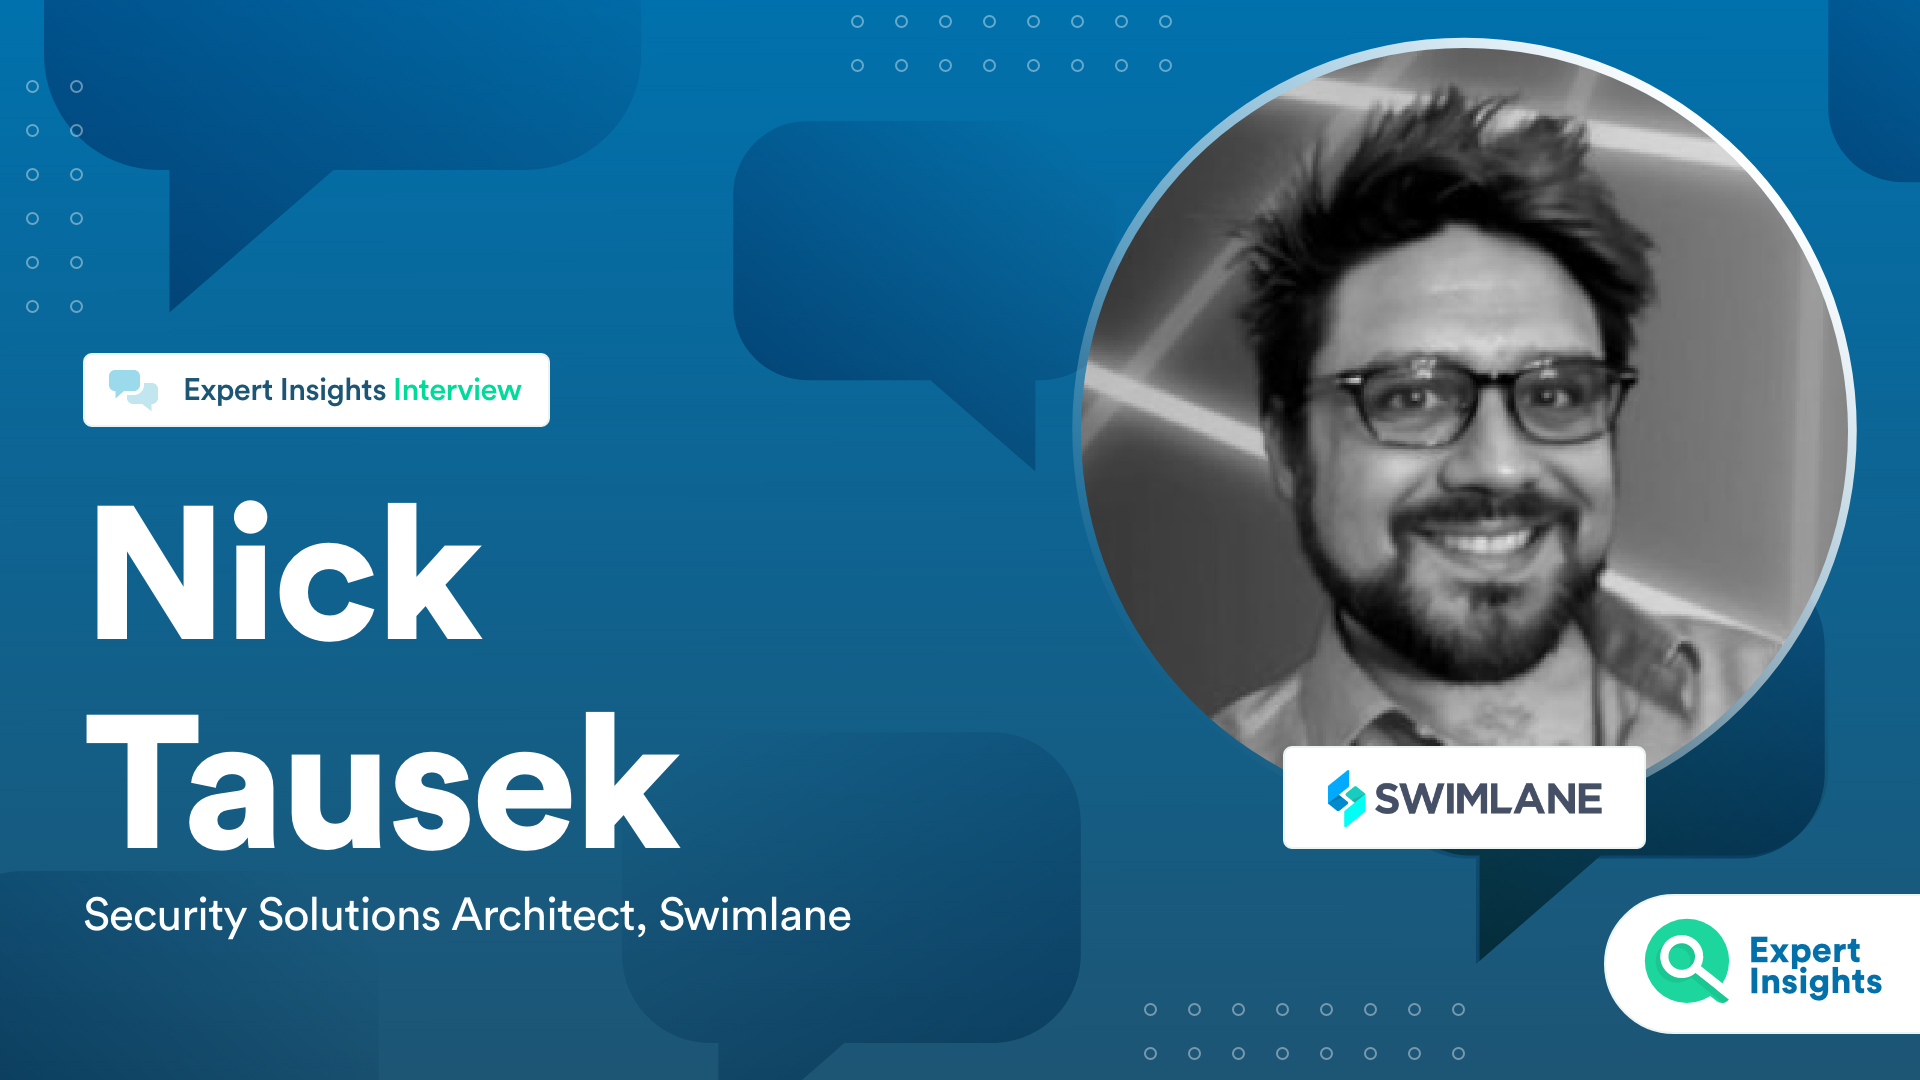 Expert Insights Interview With Nick Tausek Of Swimlane